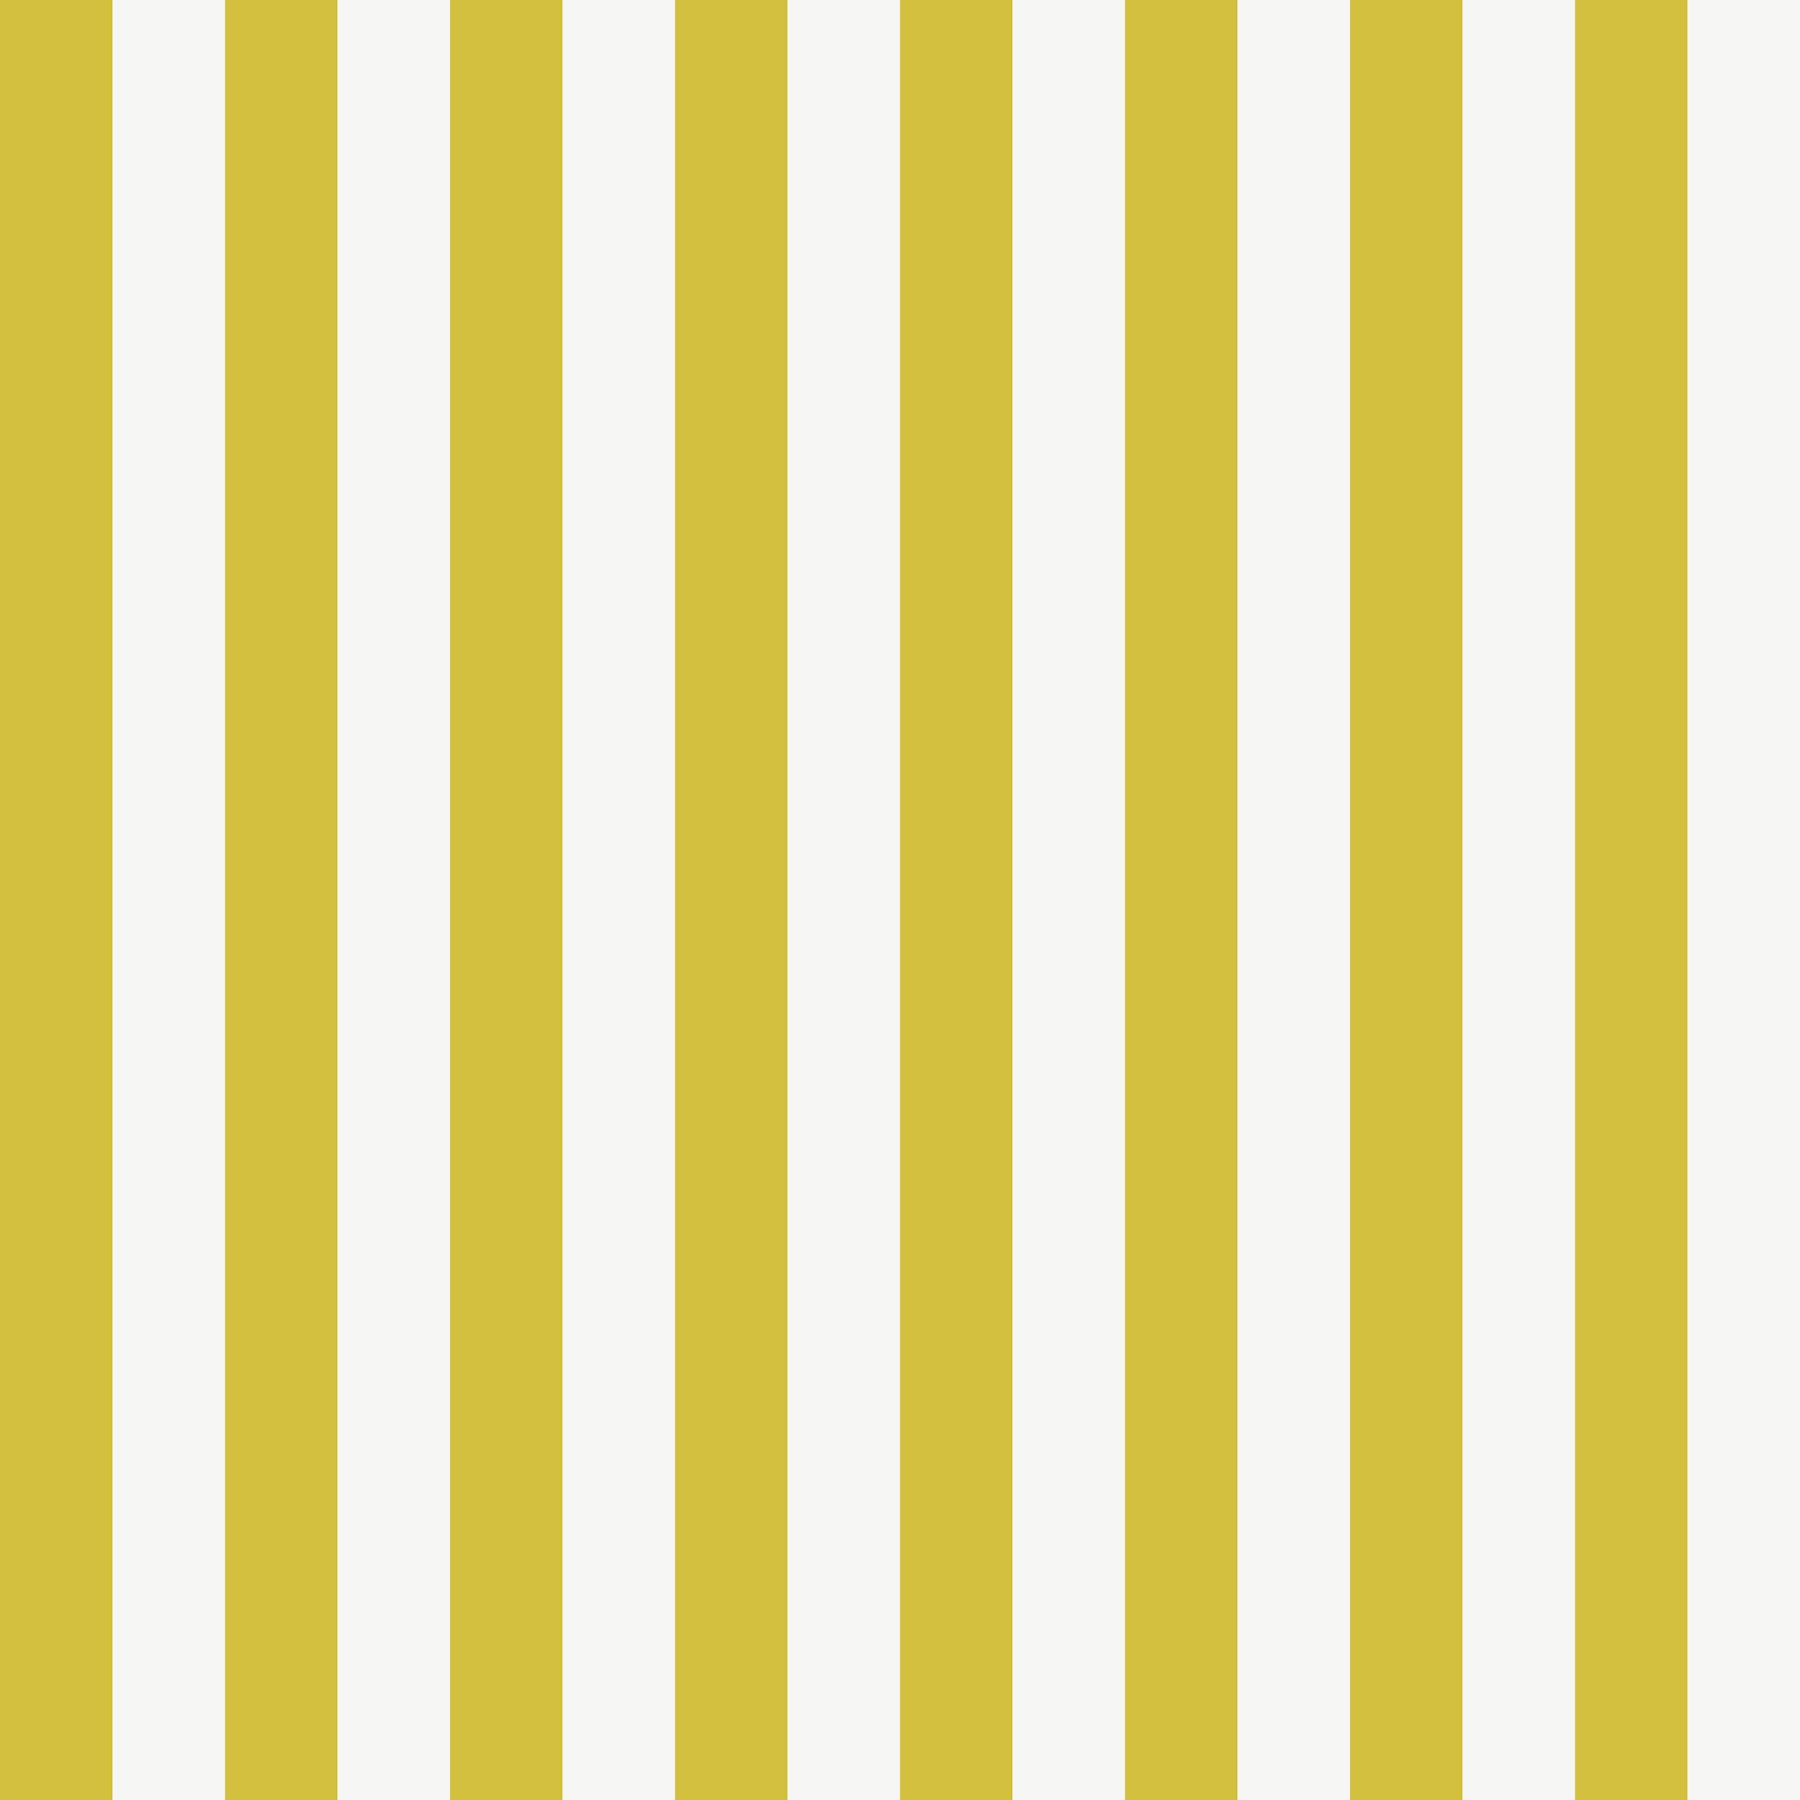 stipes yellow background